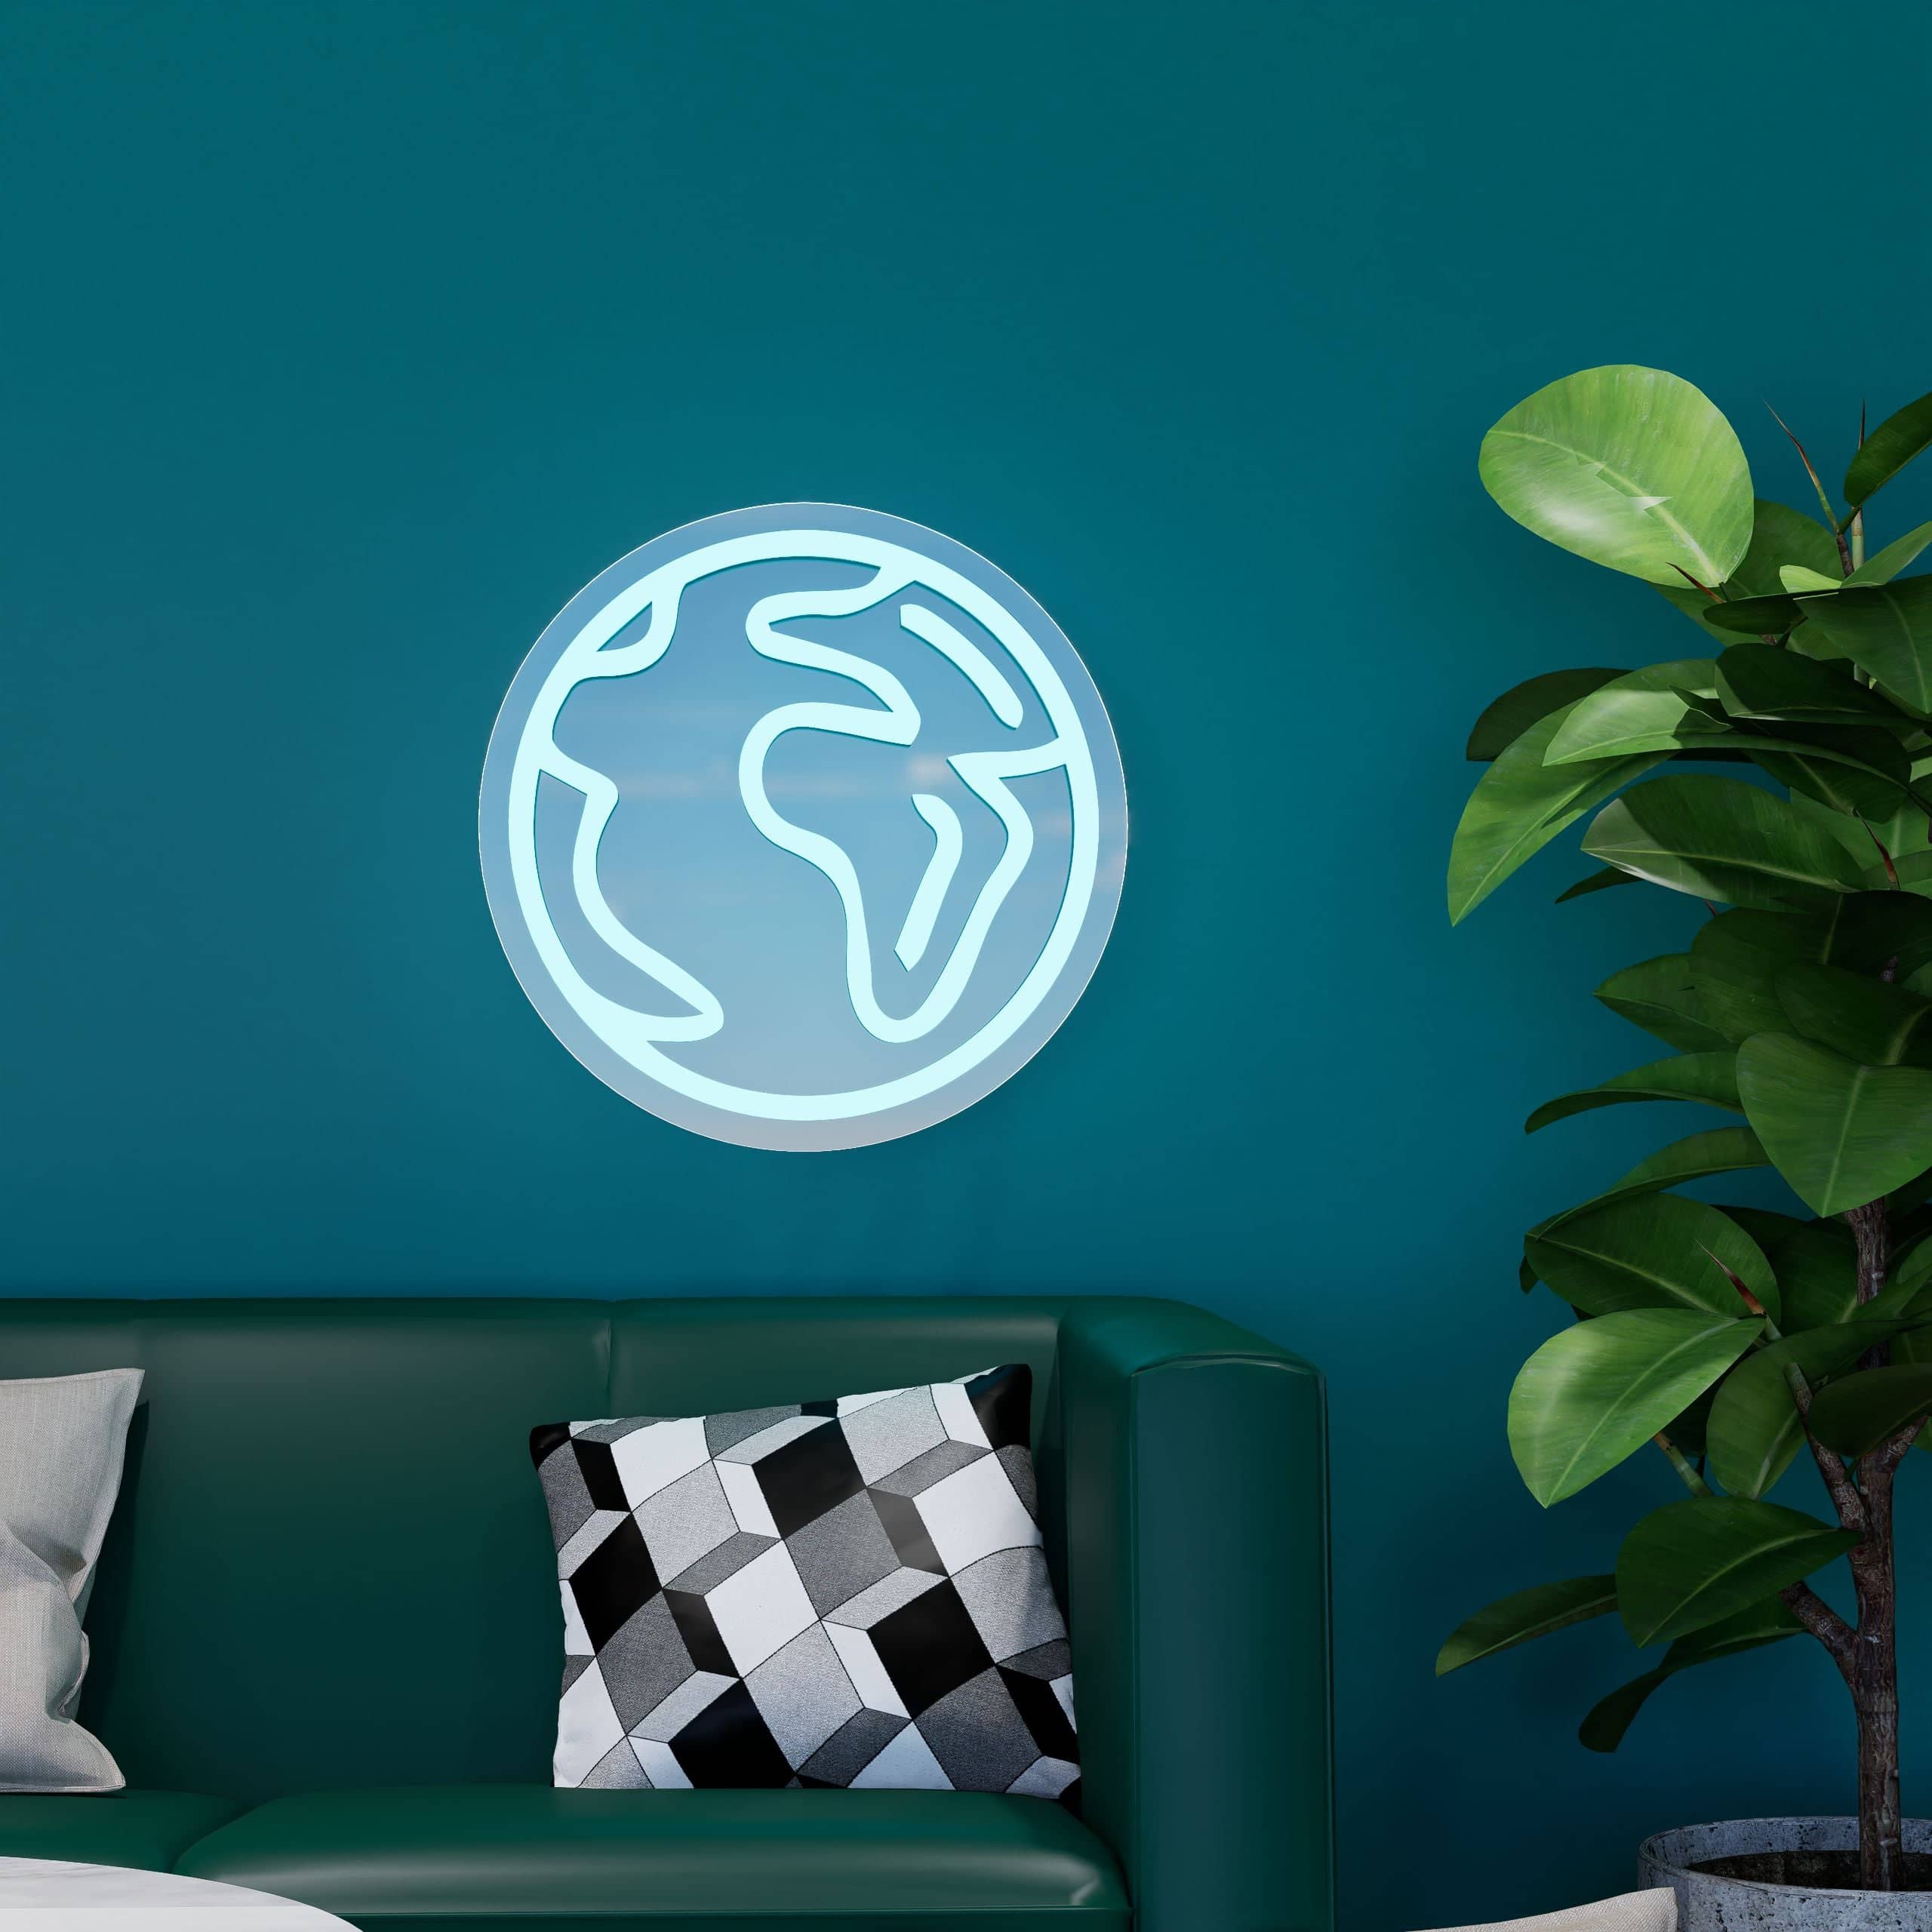 Peace of earth sign adds whimsical touch to kids spaces